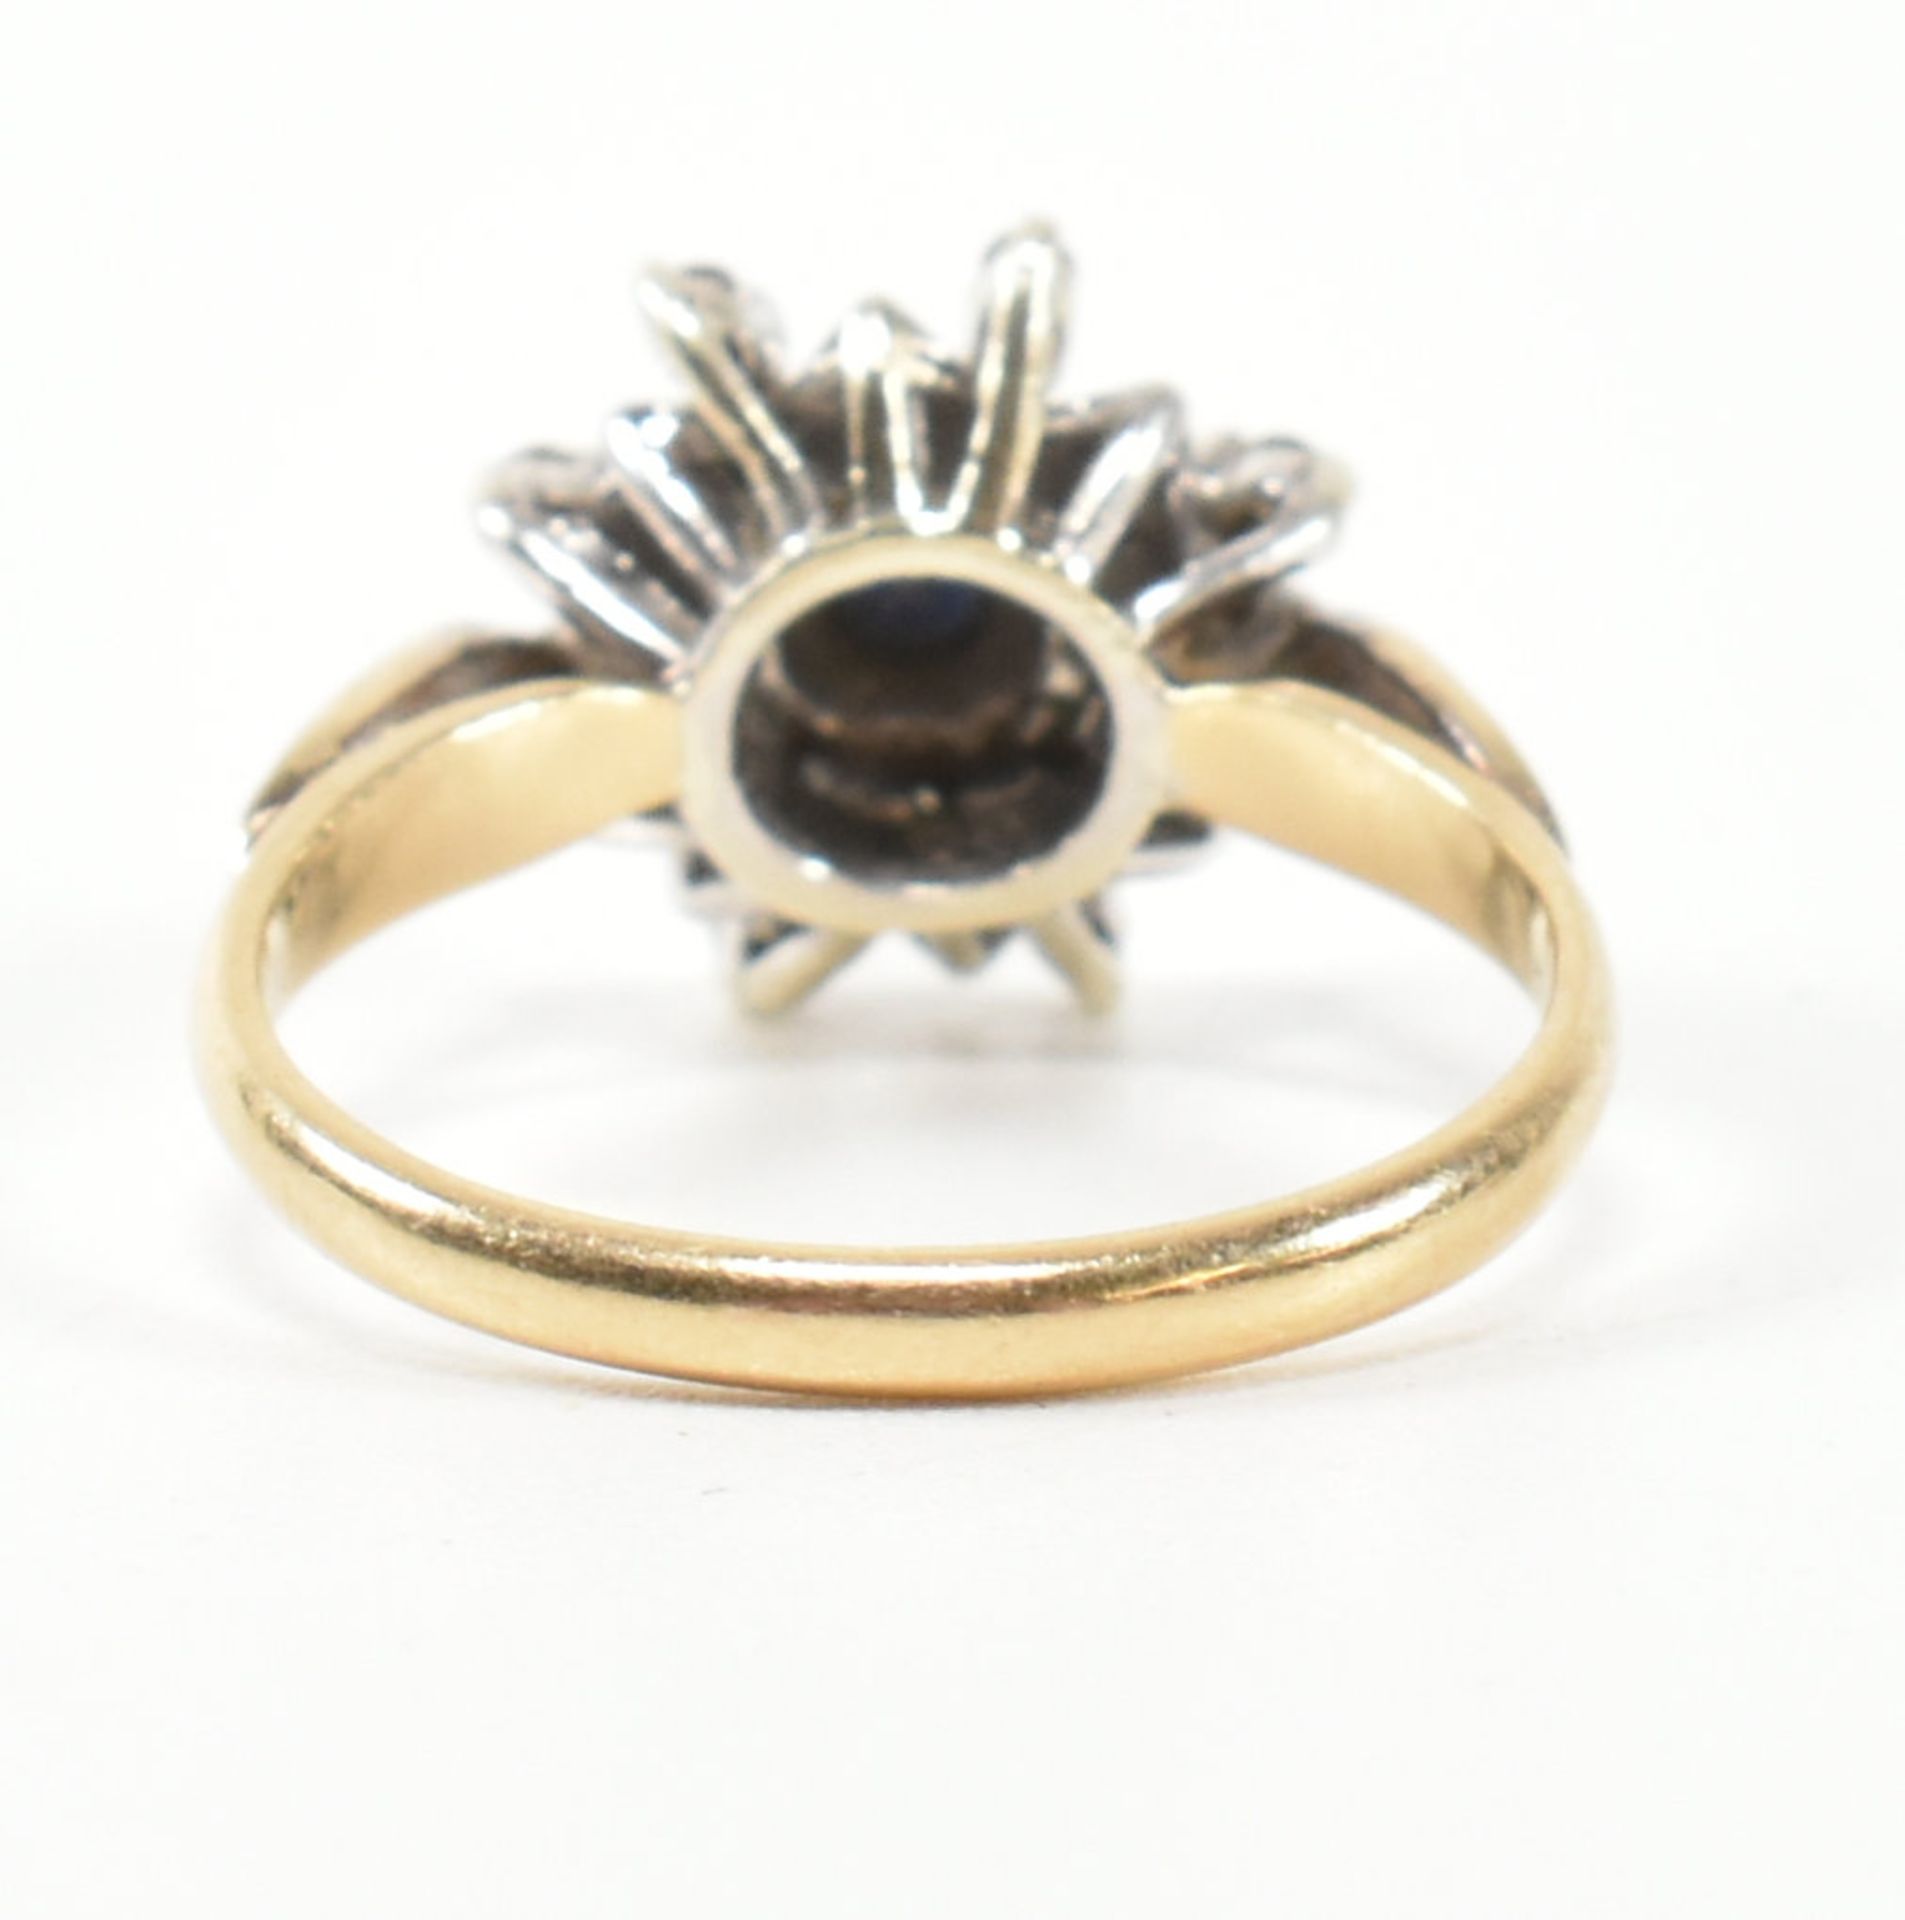 HALLMARKED 9CT GOLD DIAMOND & SAPPHIRE CLUSTER RING - Image 5 of 7